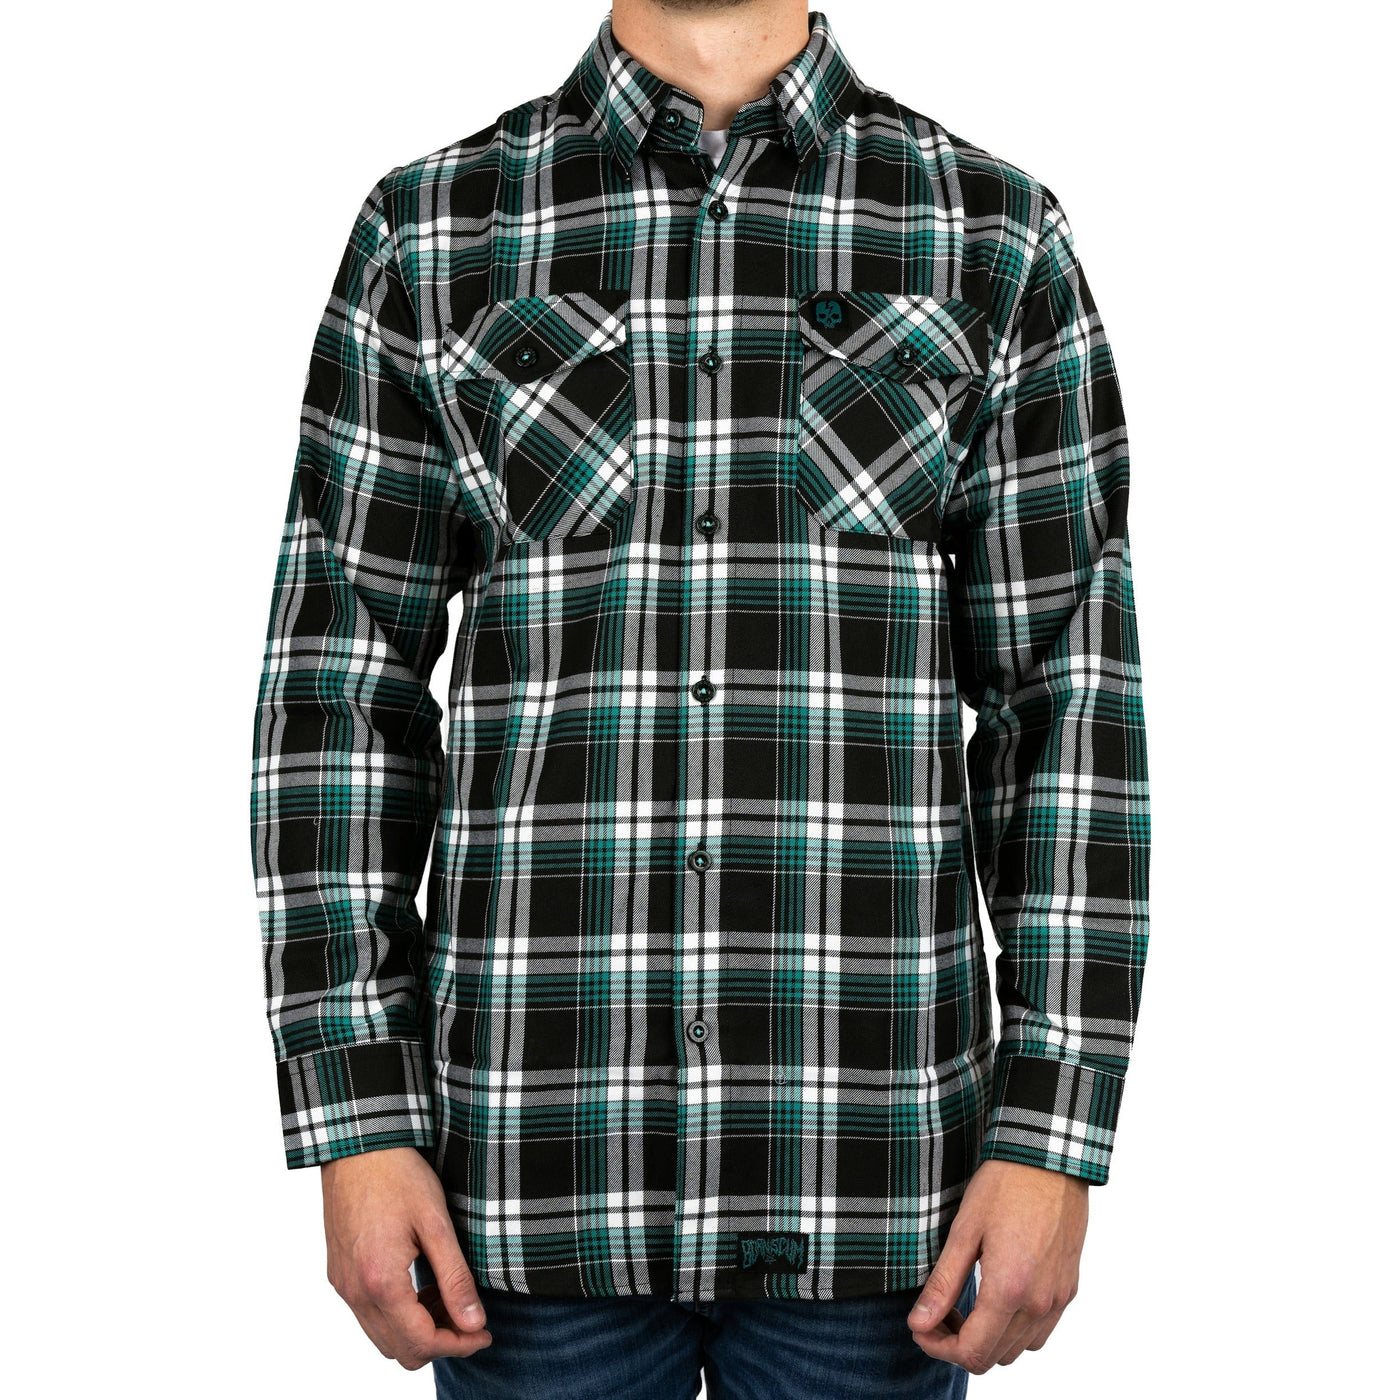 OUT OF STEP FLANNEL